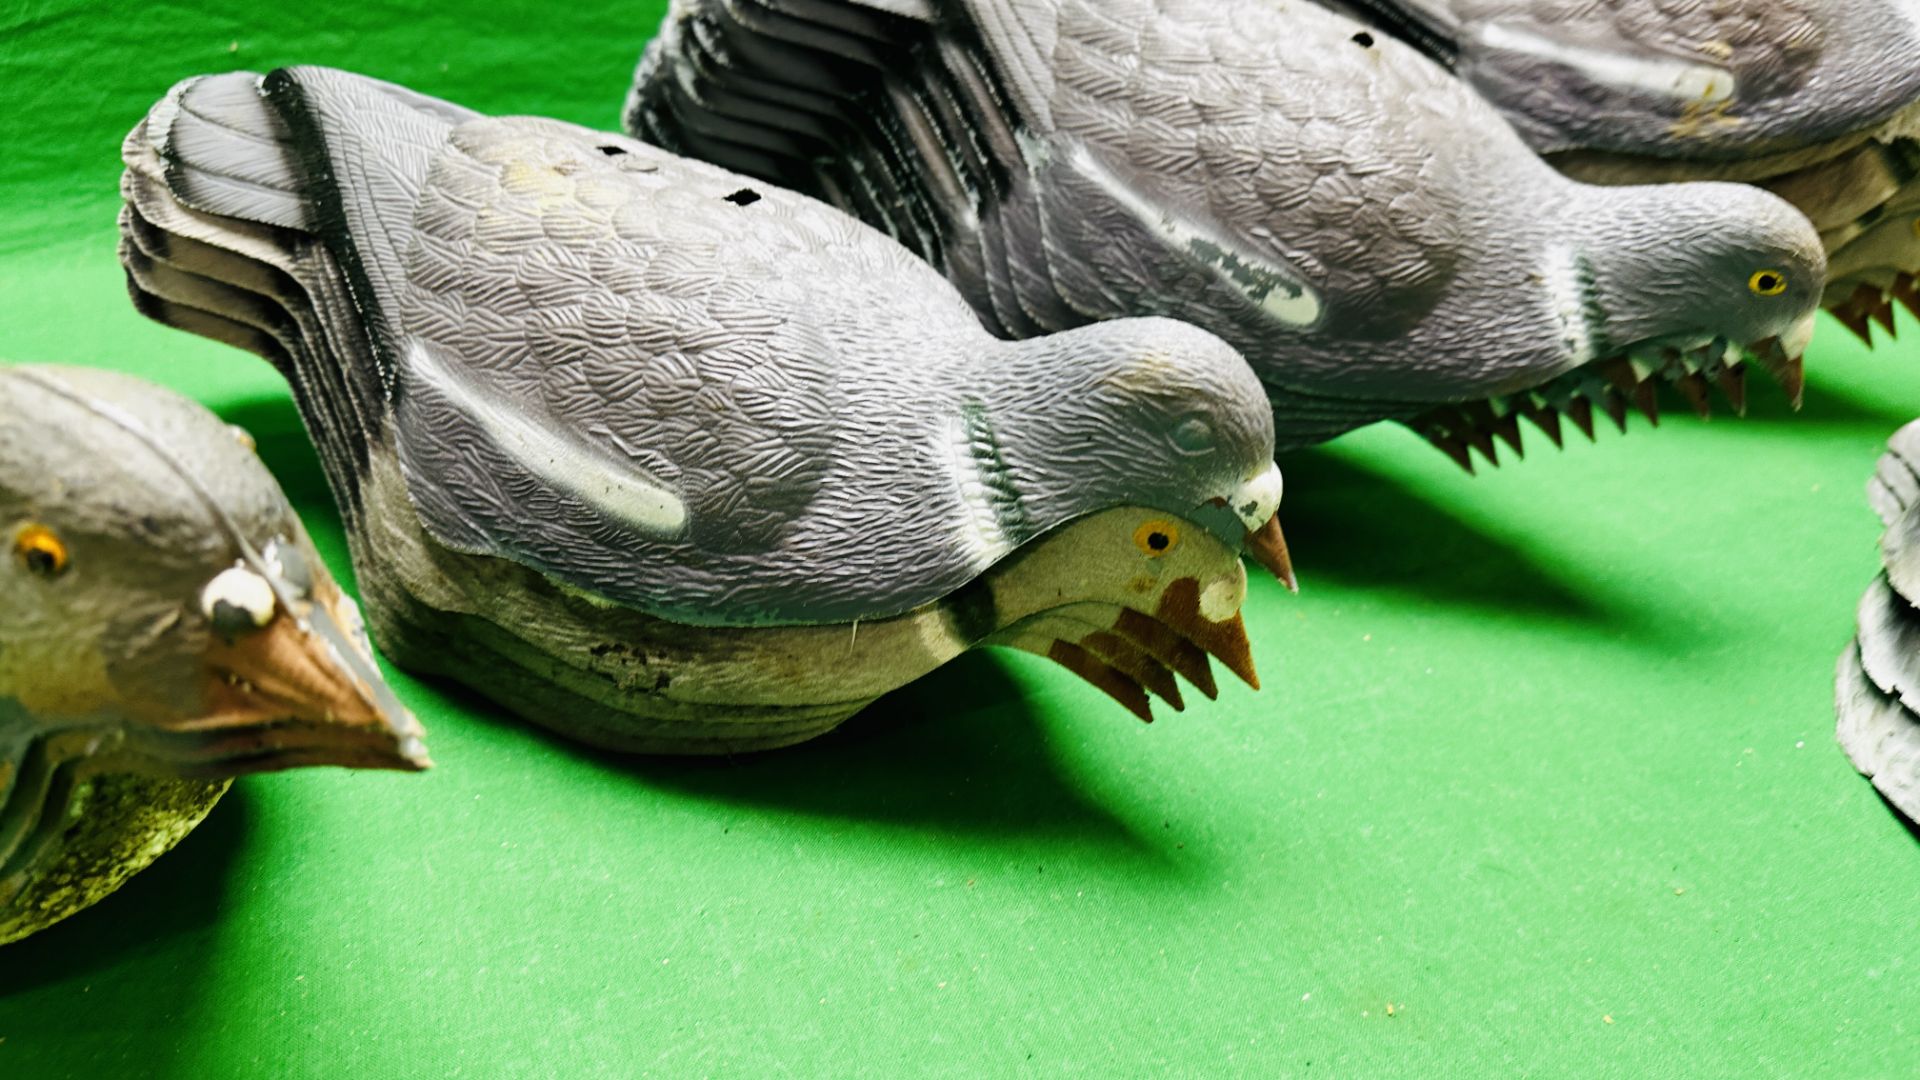 A GROUP OF 30 HALF BODY PIGEON DECOYS. - Image 3 of 7